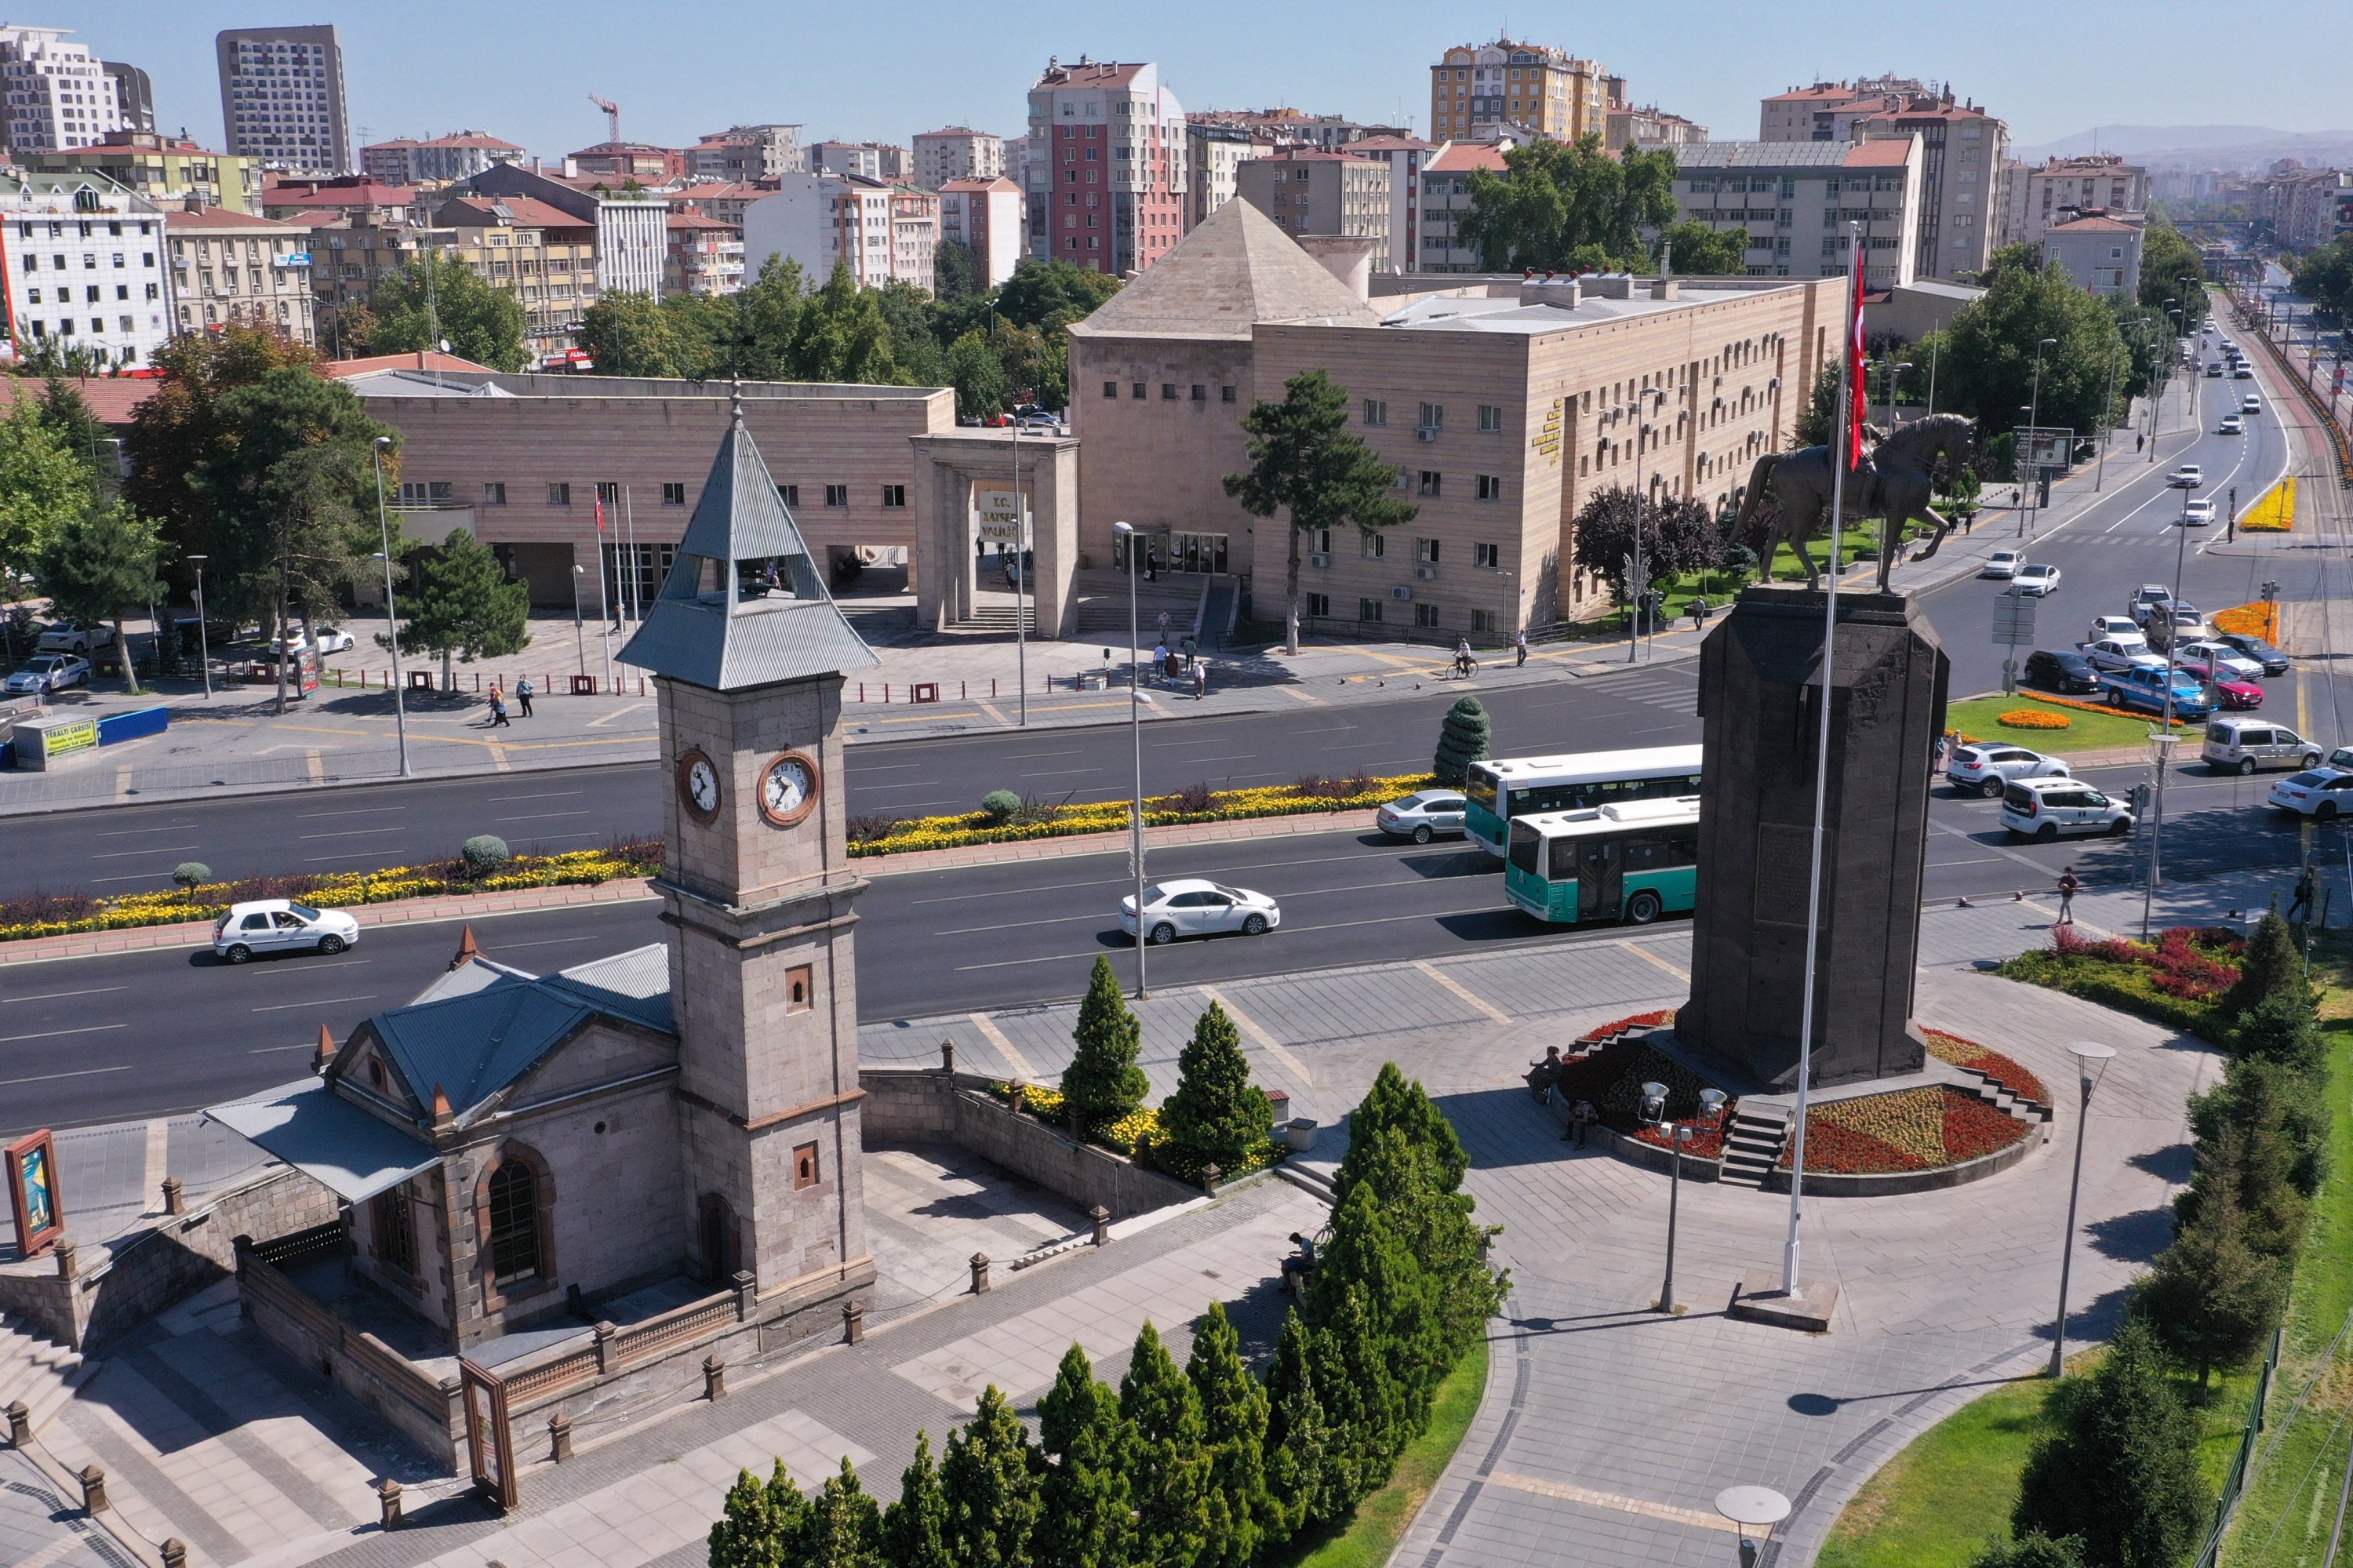 The clock tower in central Kayseri province’s Cumhuriyet Square, Turkey, Aug. 24, 2020. (AA Photo)